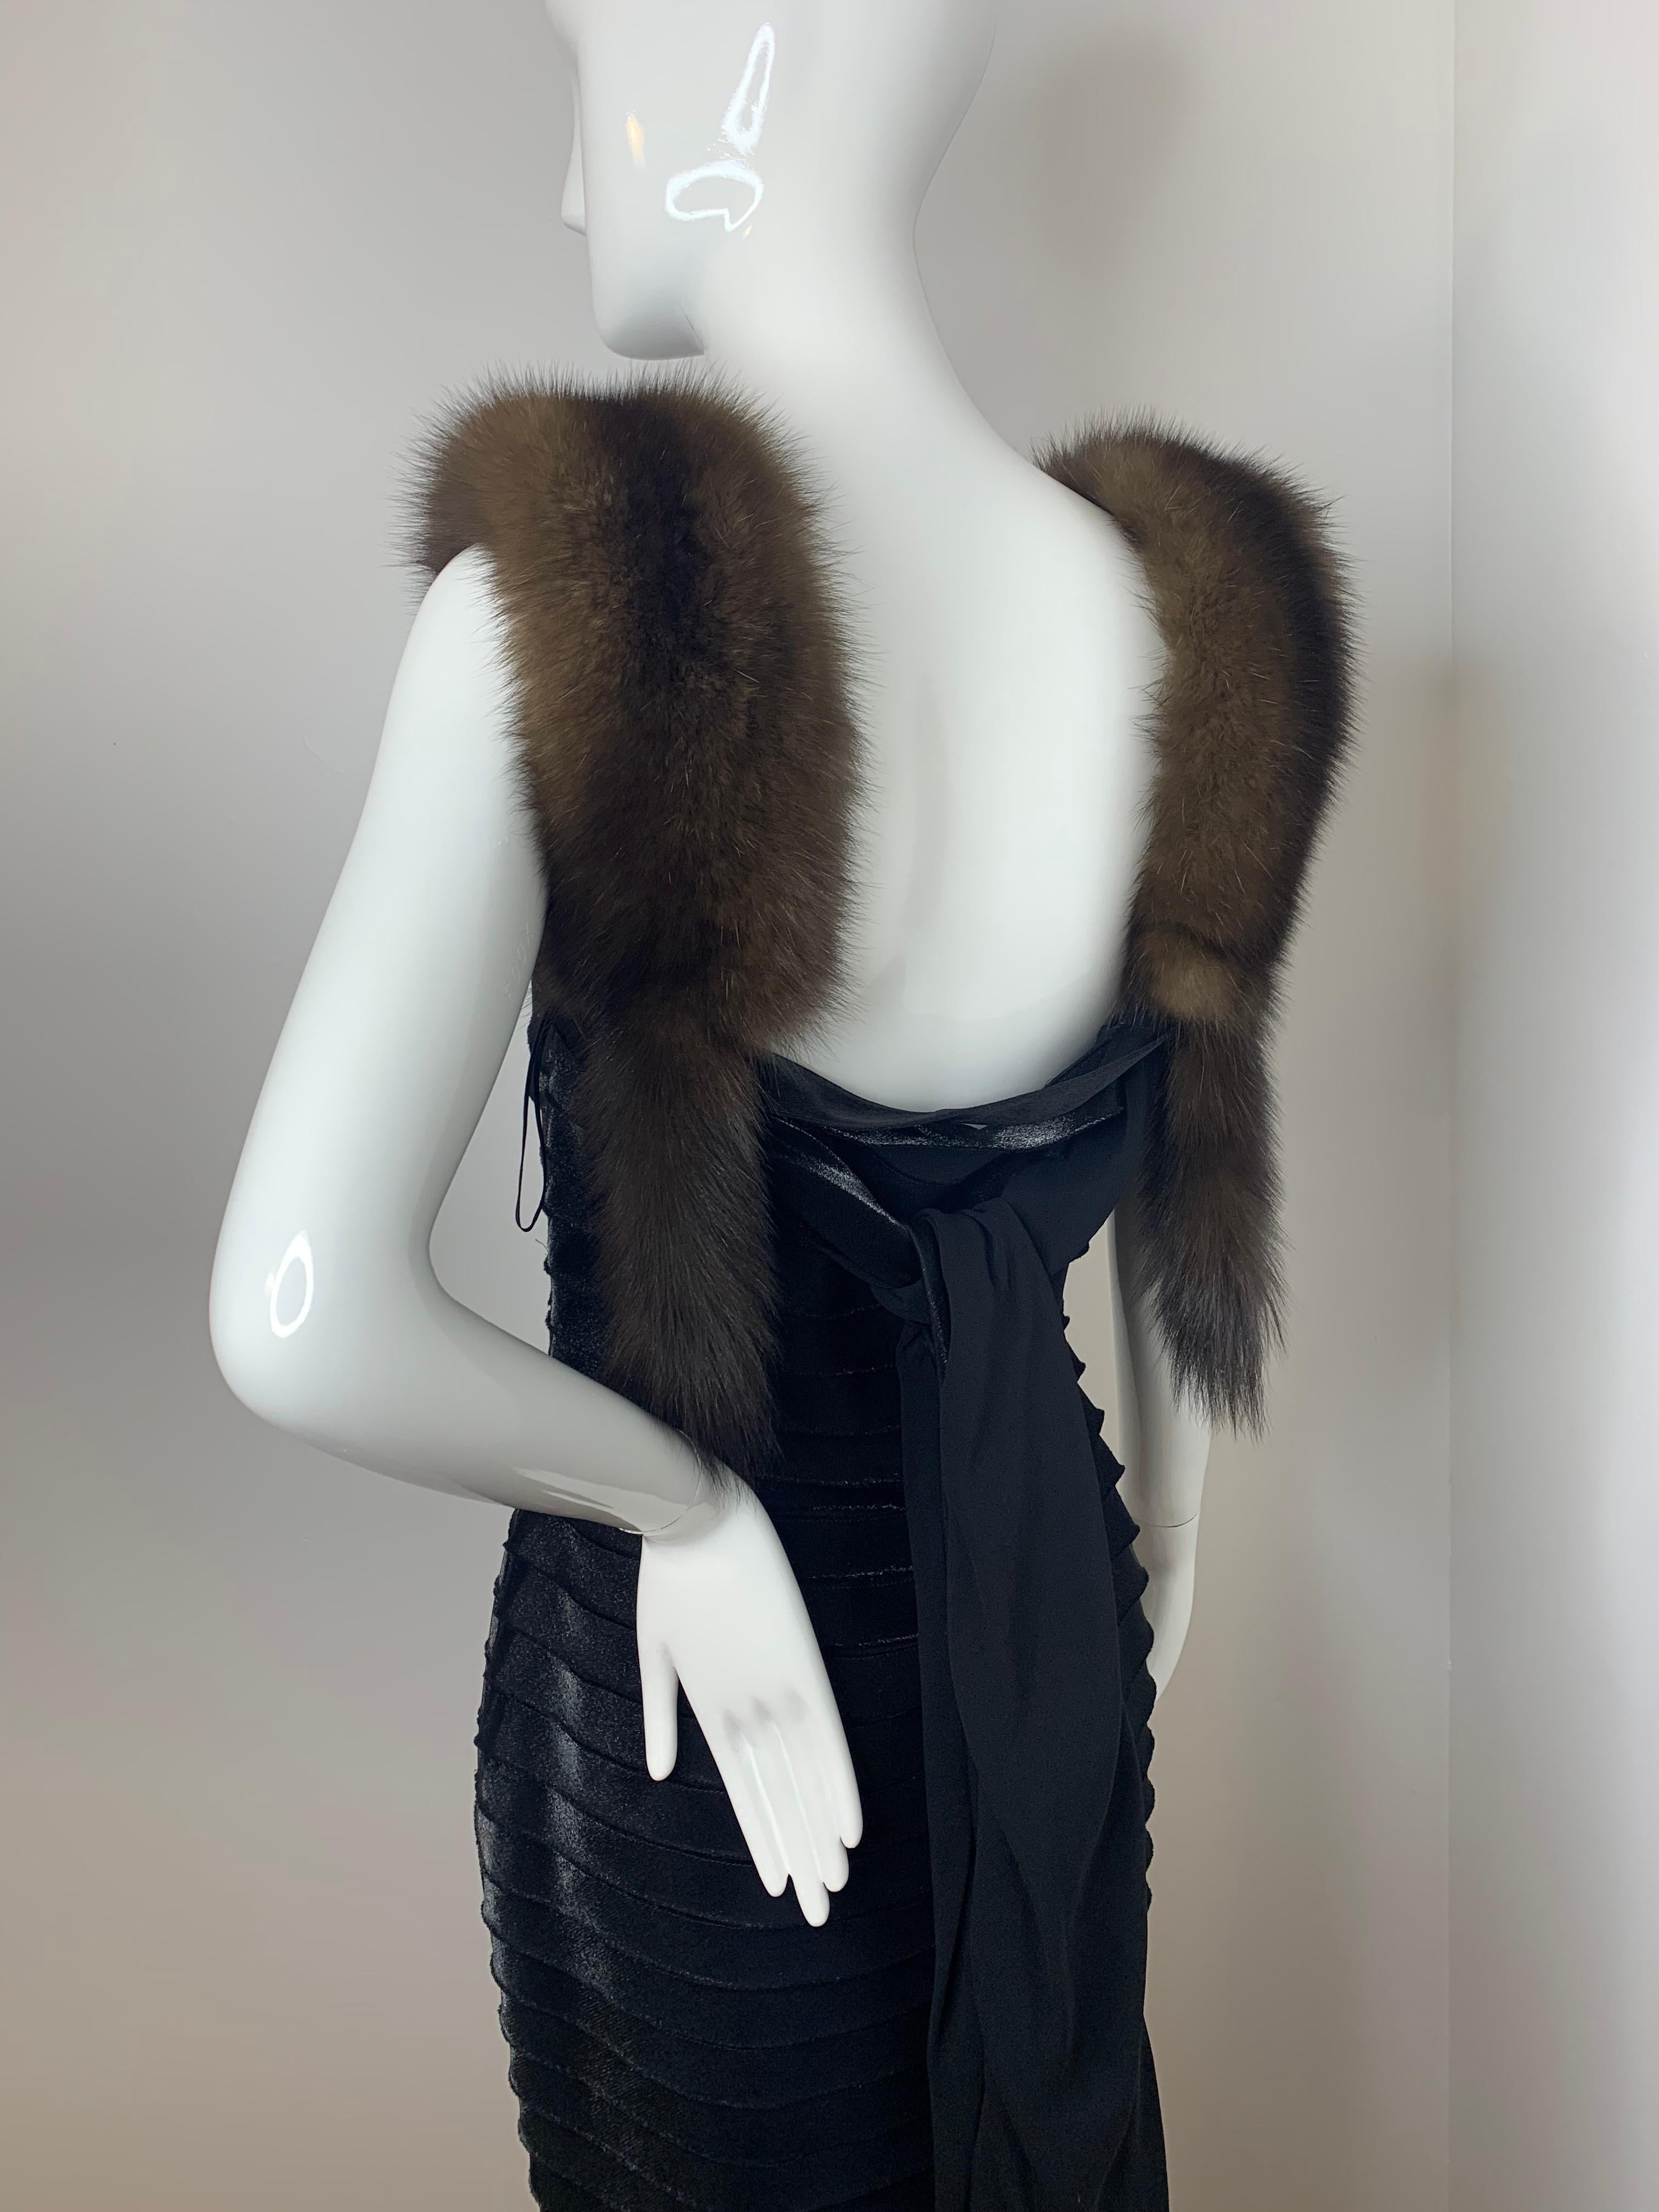 Fendi black shimmer silk and Russian Sable gown dress  In Excellent Condition For Sale In Annandale, VA